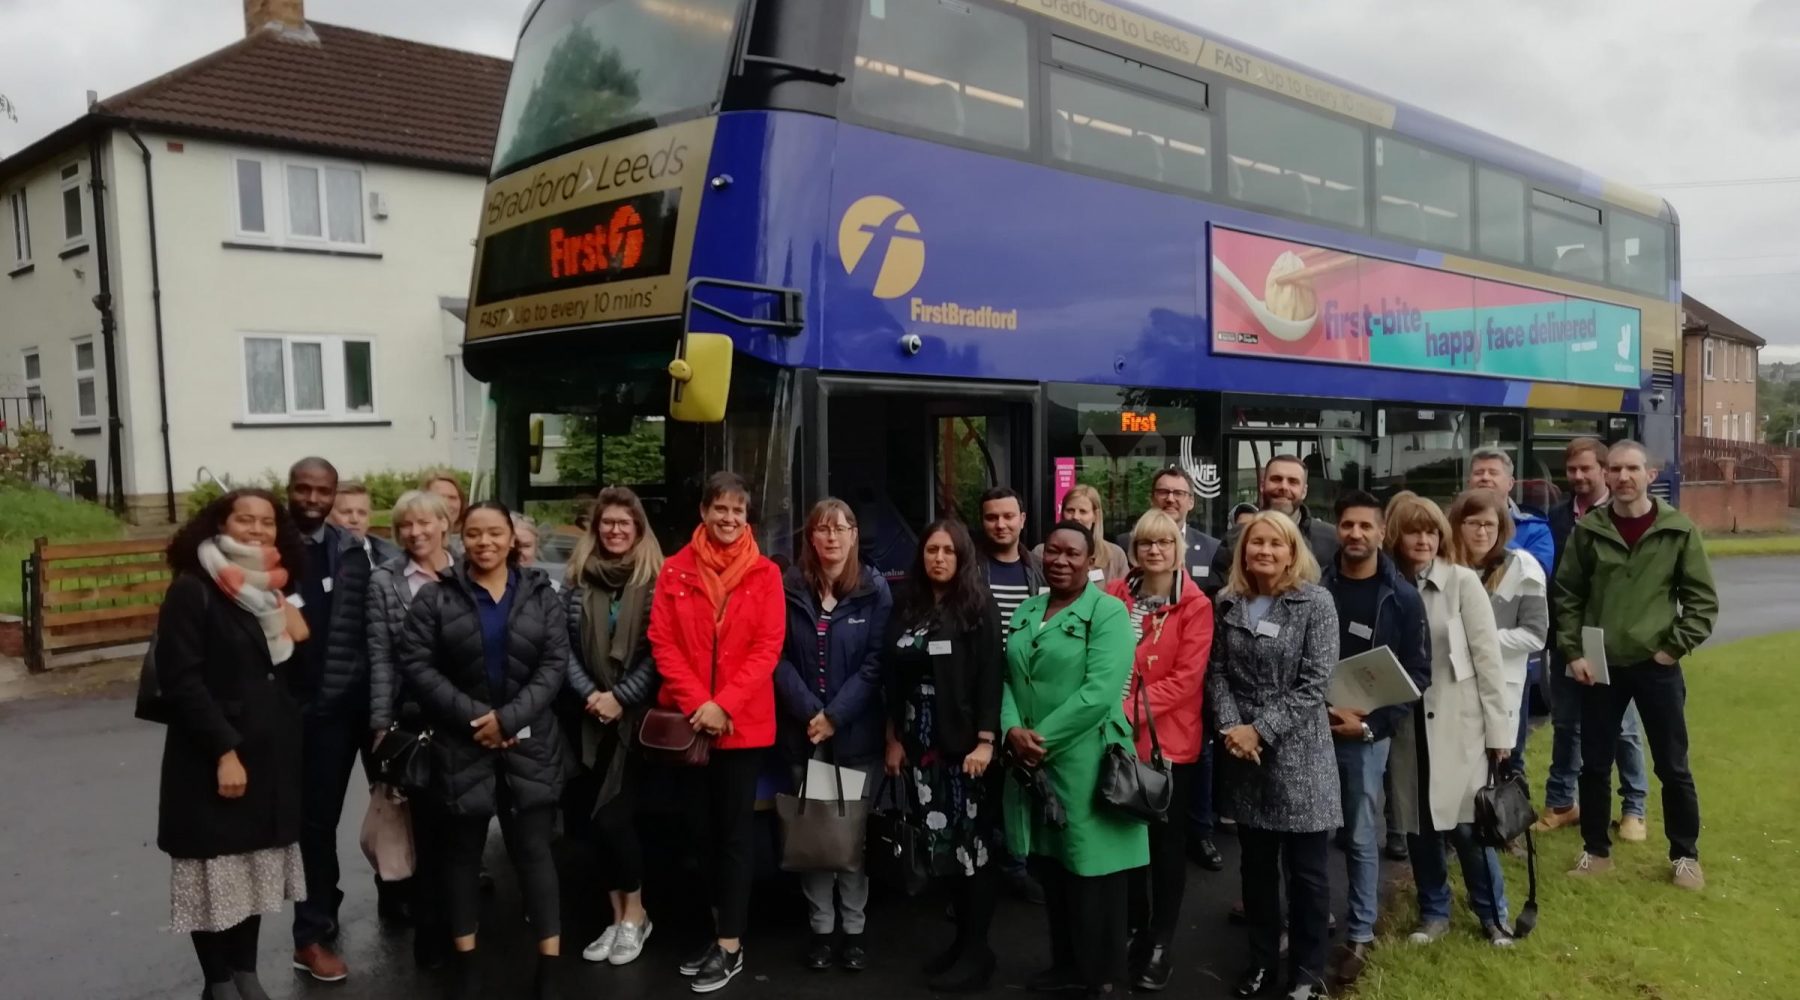 Bus tour for businesses backing GiveBradford campaign